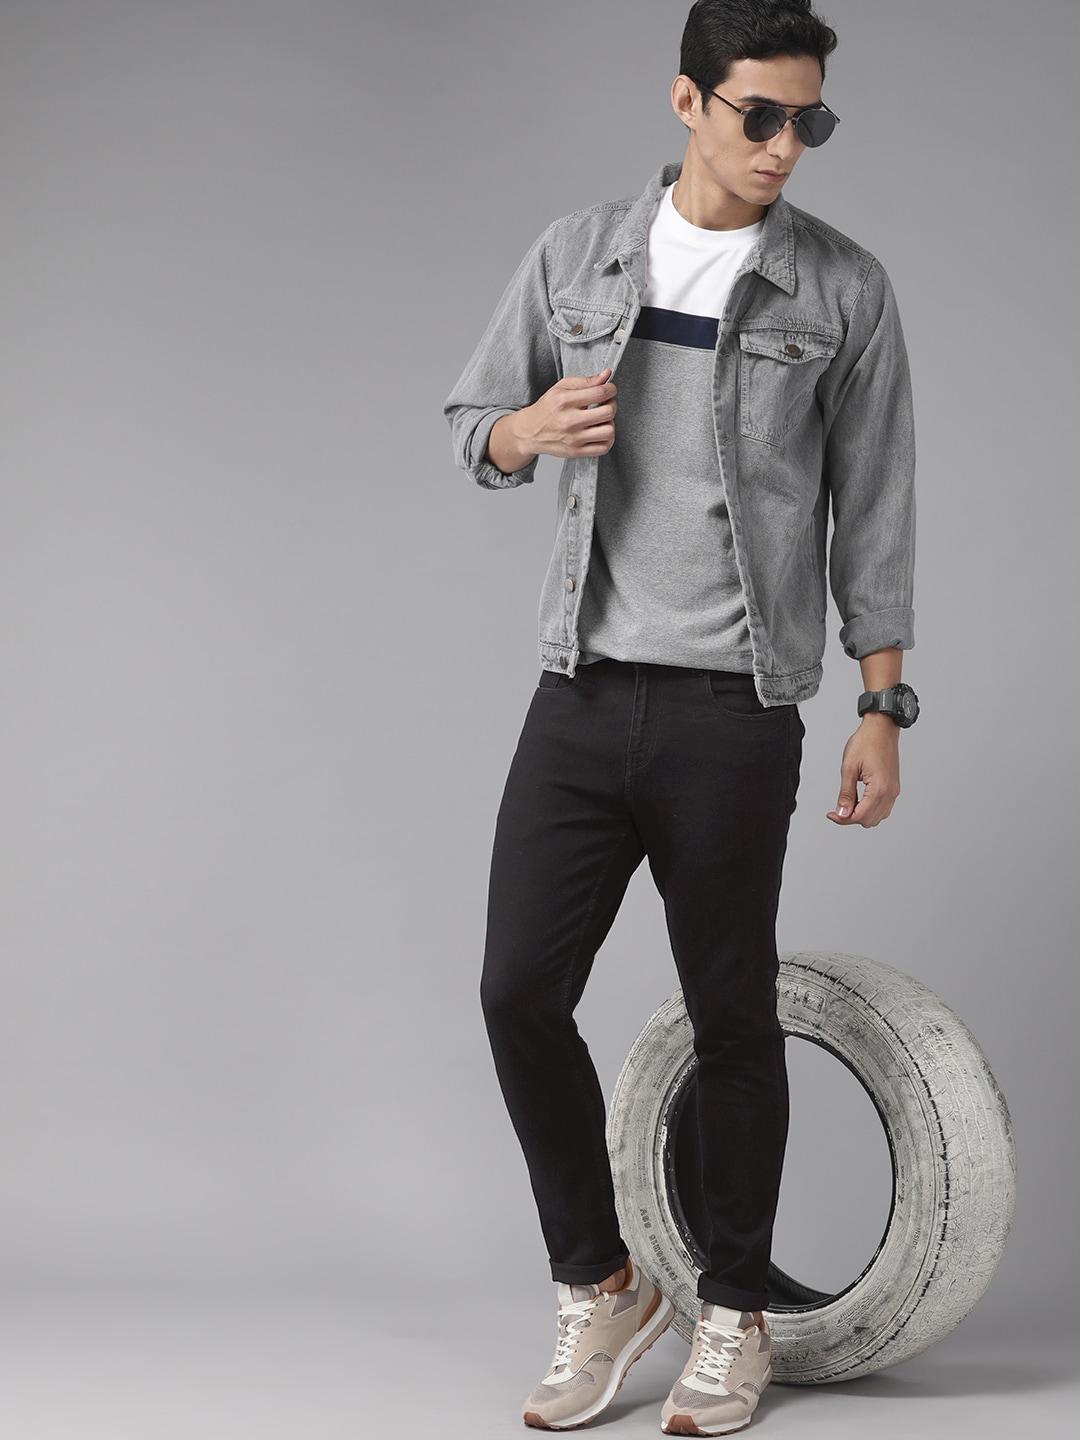 the roadster lifestyle co. men mid-rise tapered fit stretchable jeans